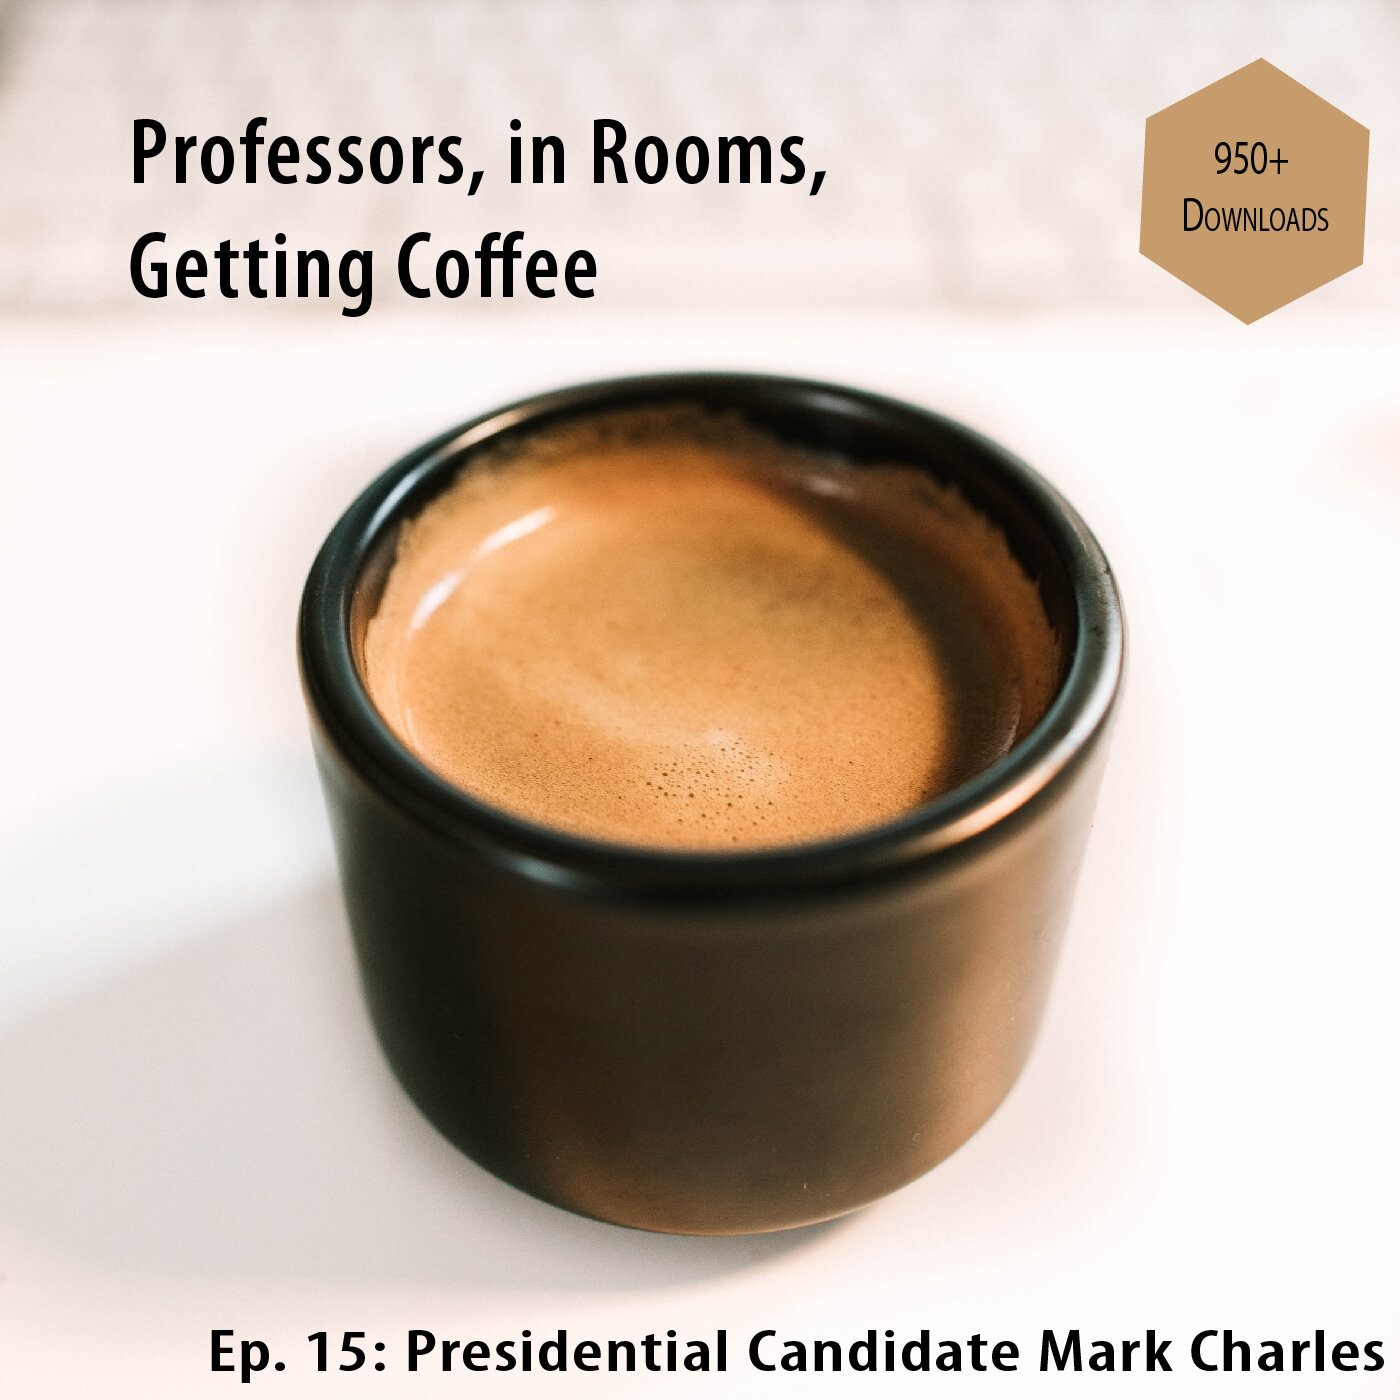 Presidential Candidate Mark Charles (Part 1 of 2)